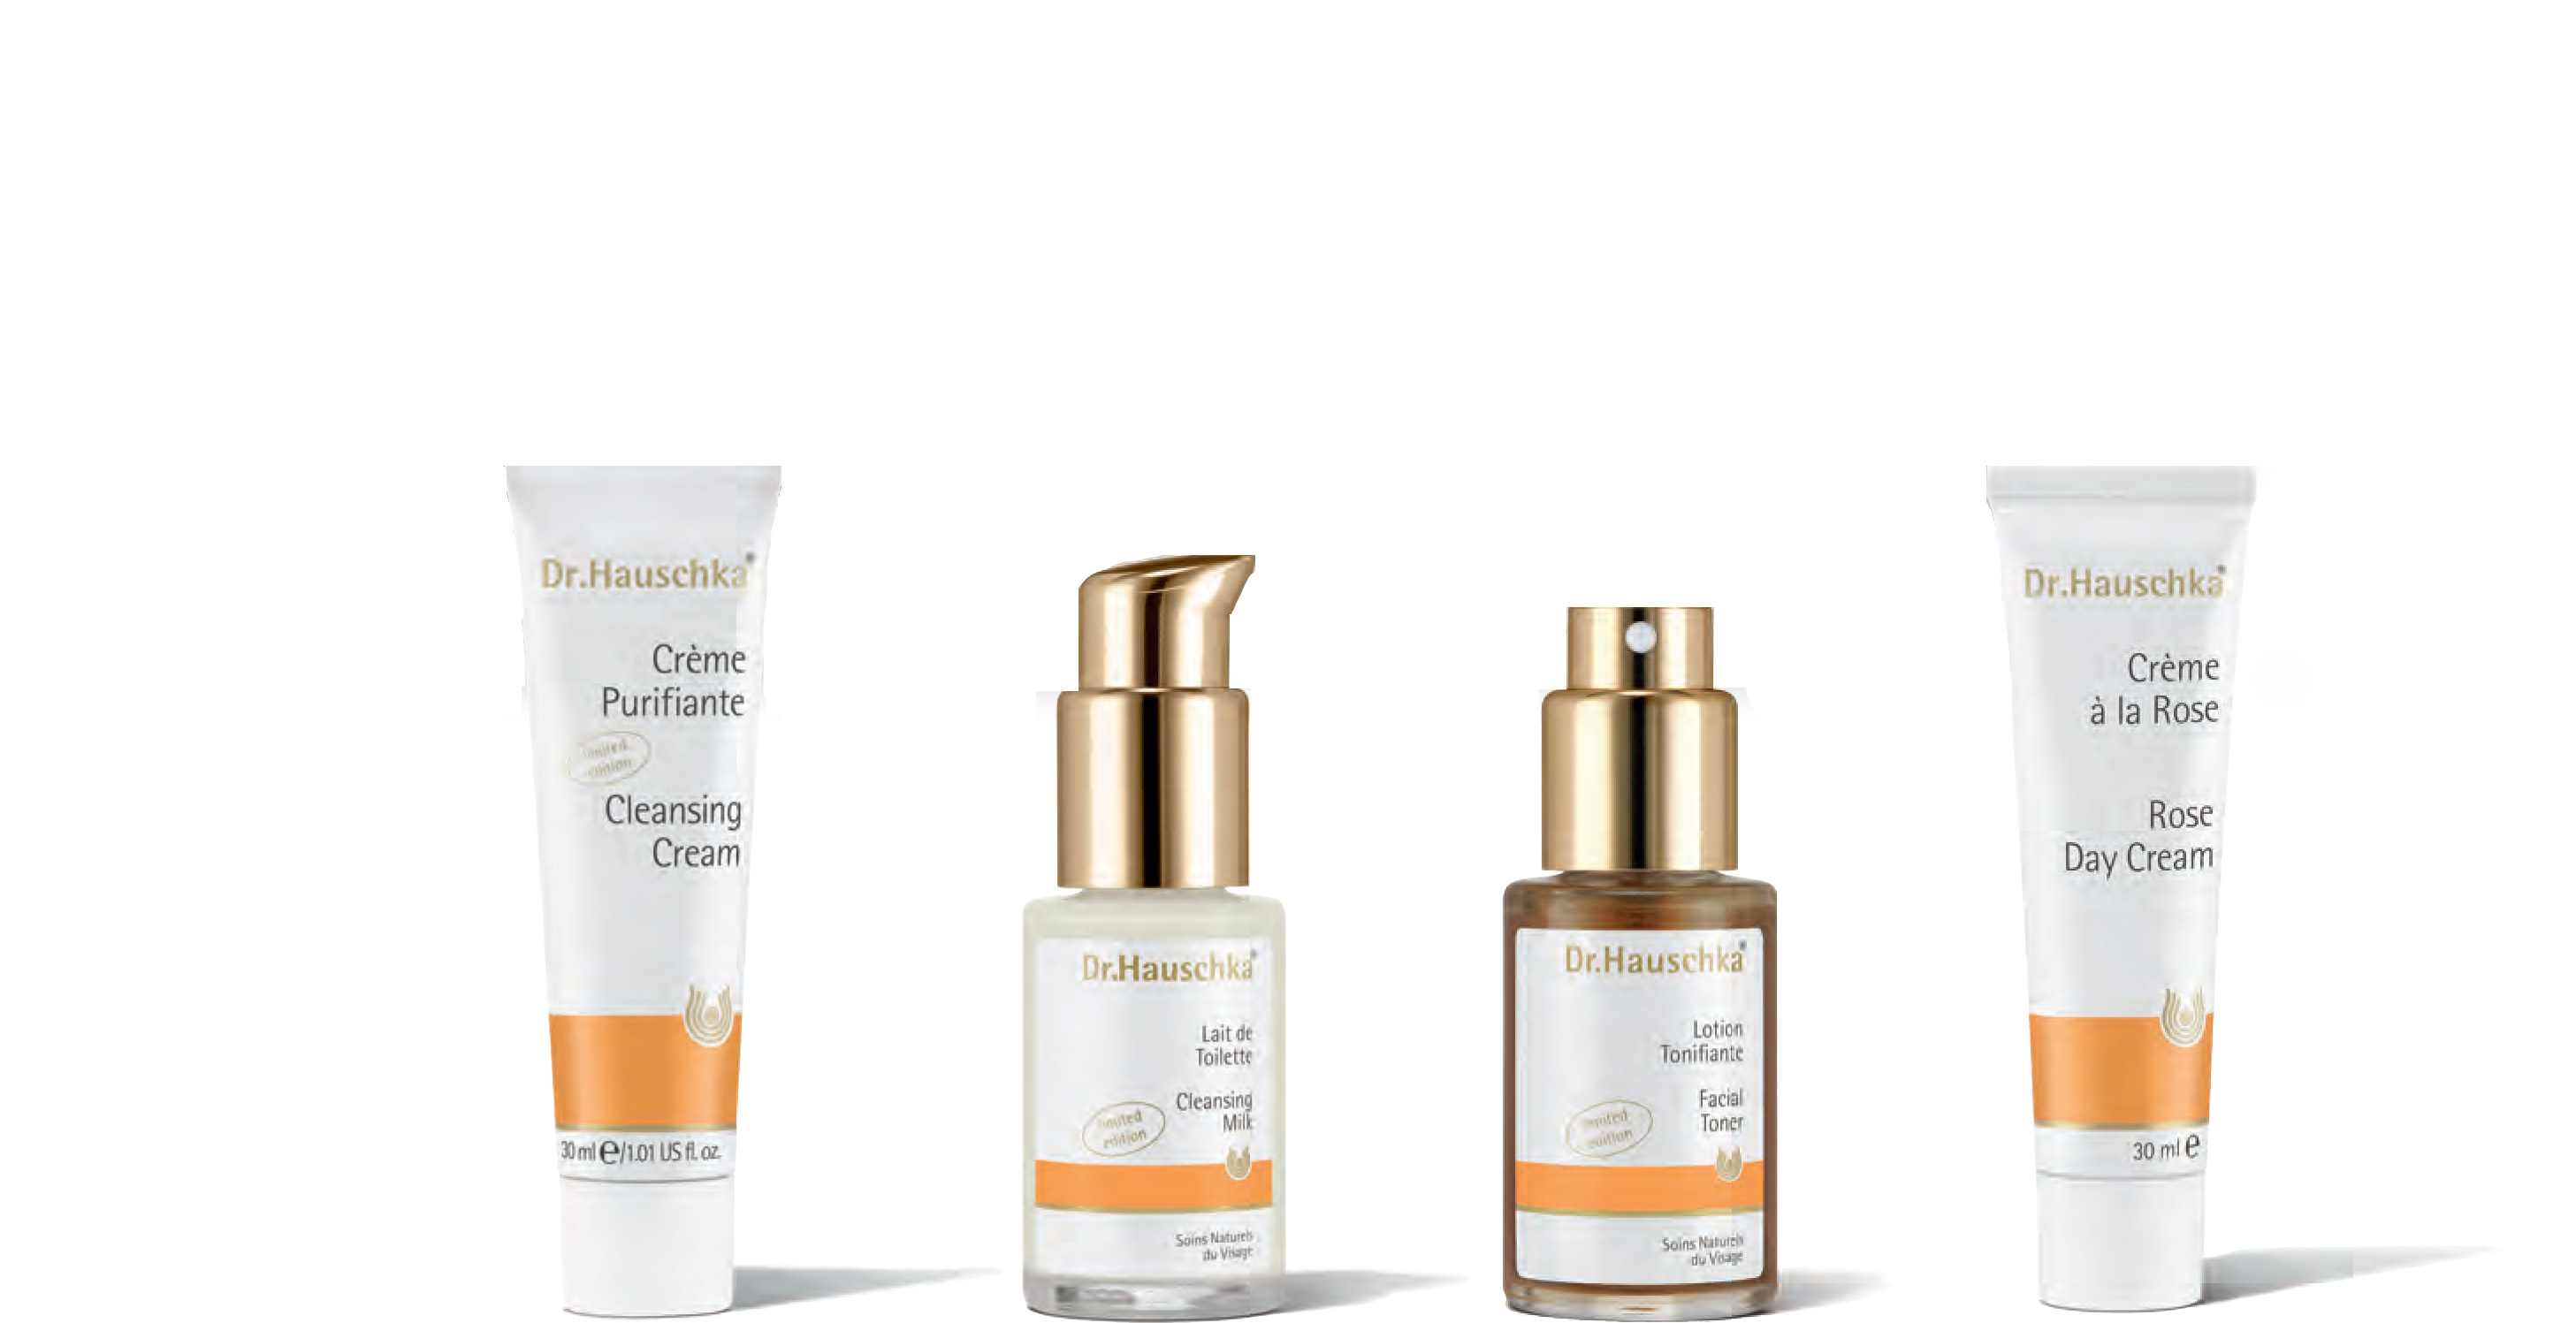 EASY TRAVELING WITH DR HAUSCHKA